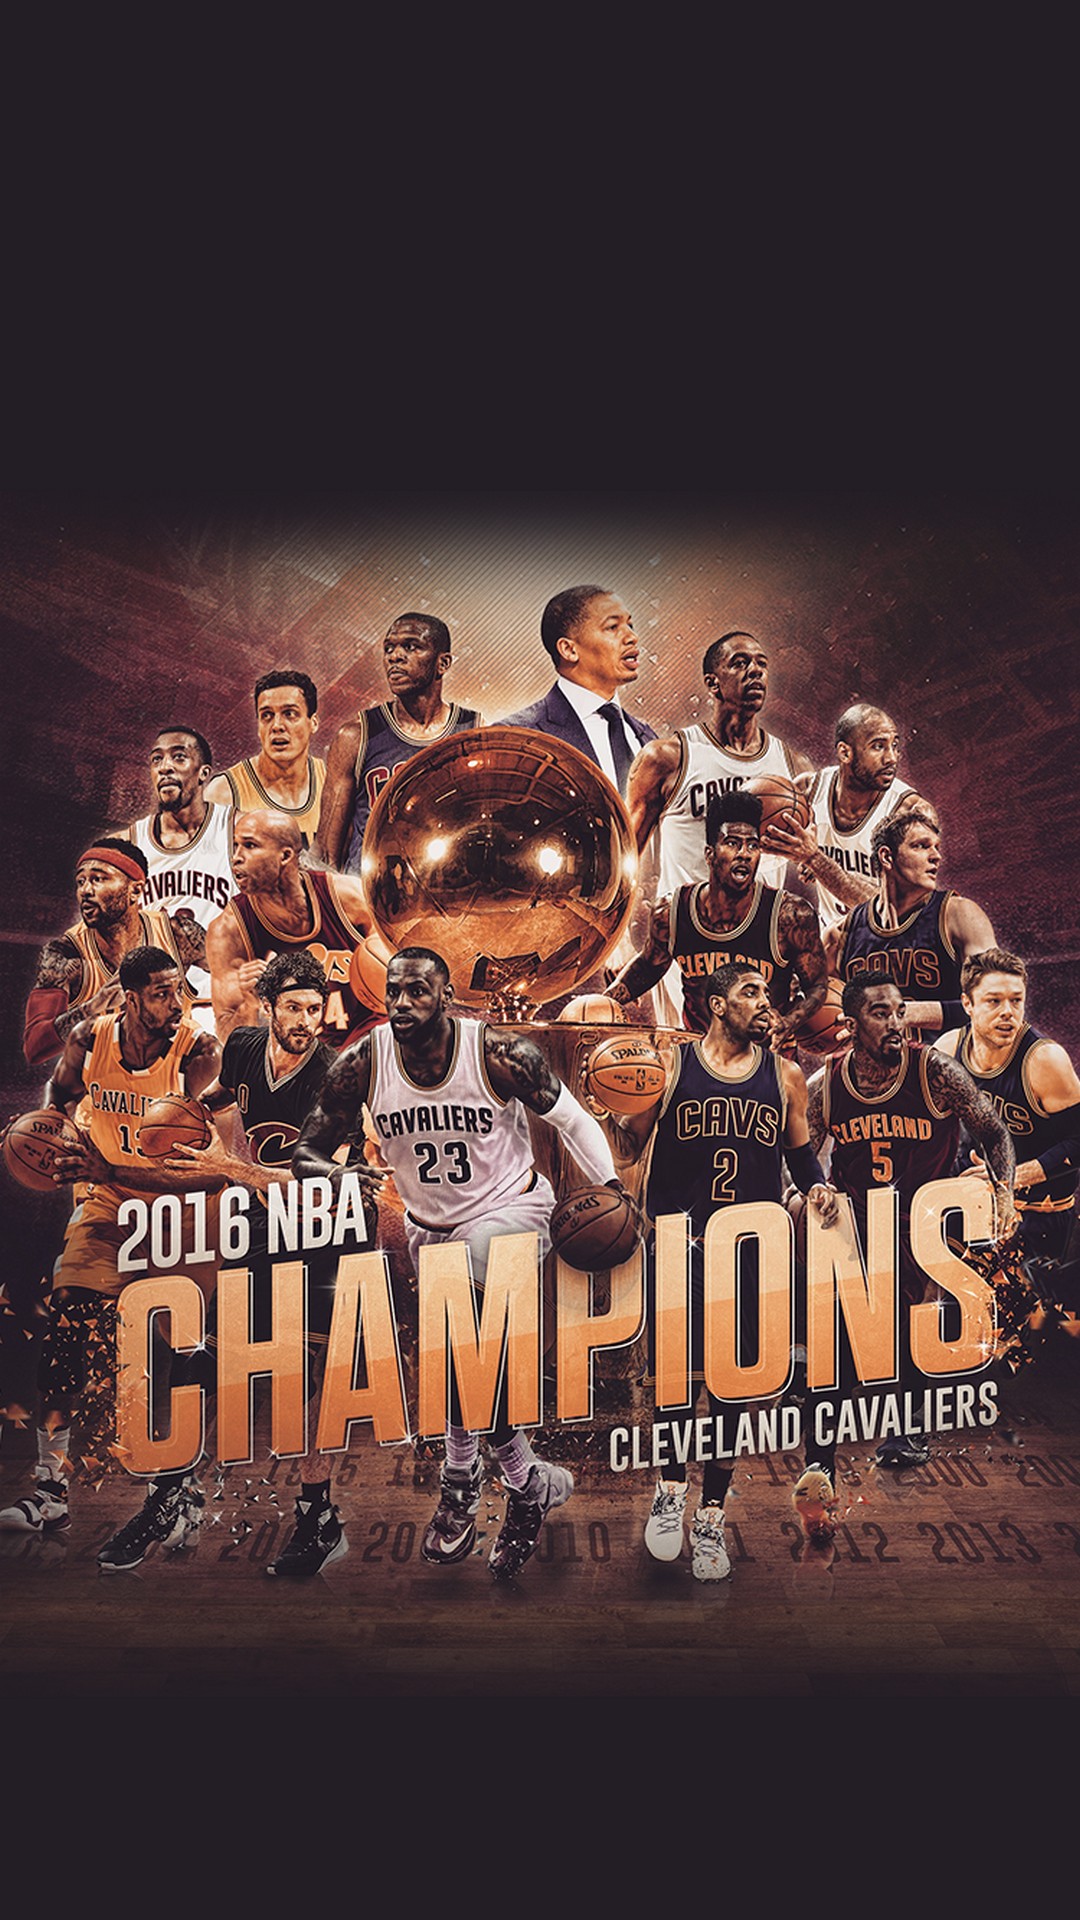 Cavs Champs iPhone Wallpaper resolution 1080x1920